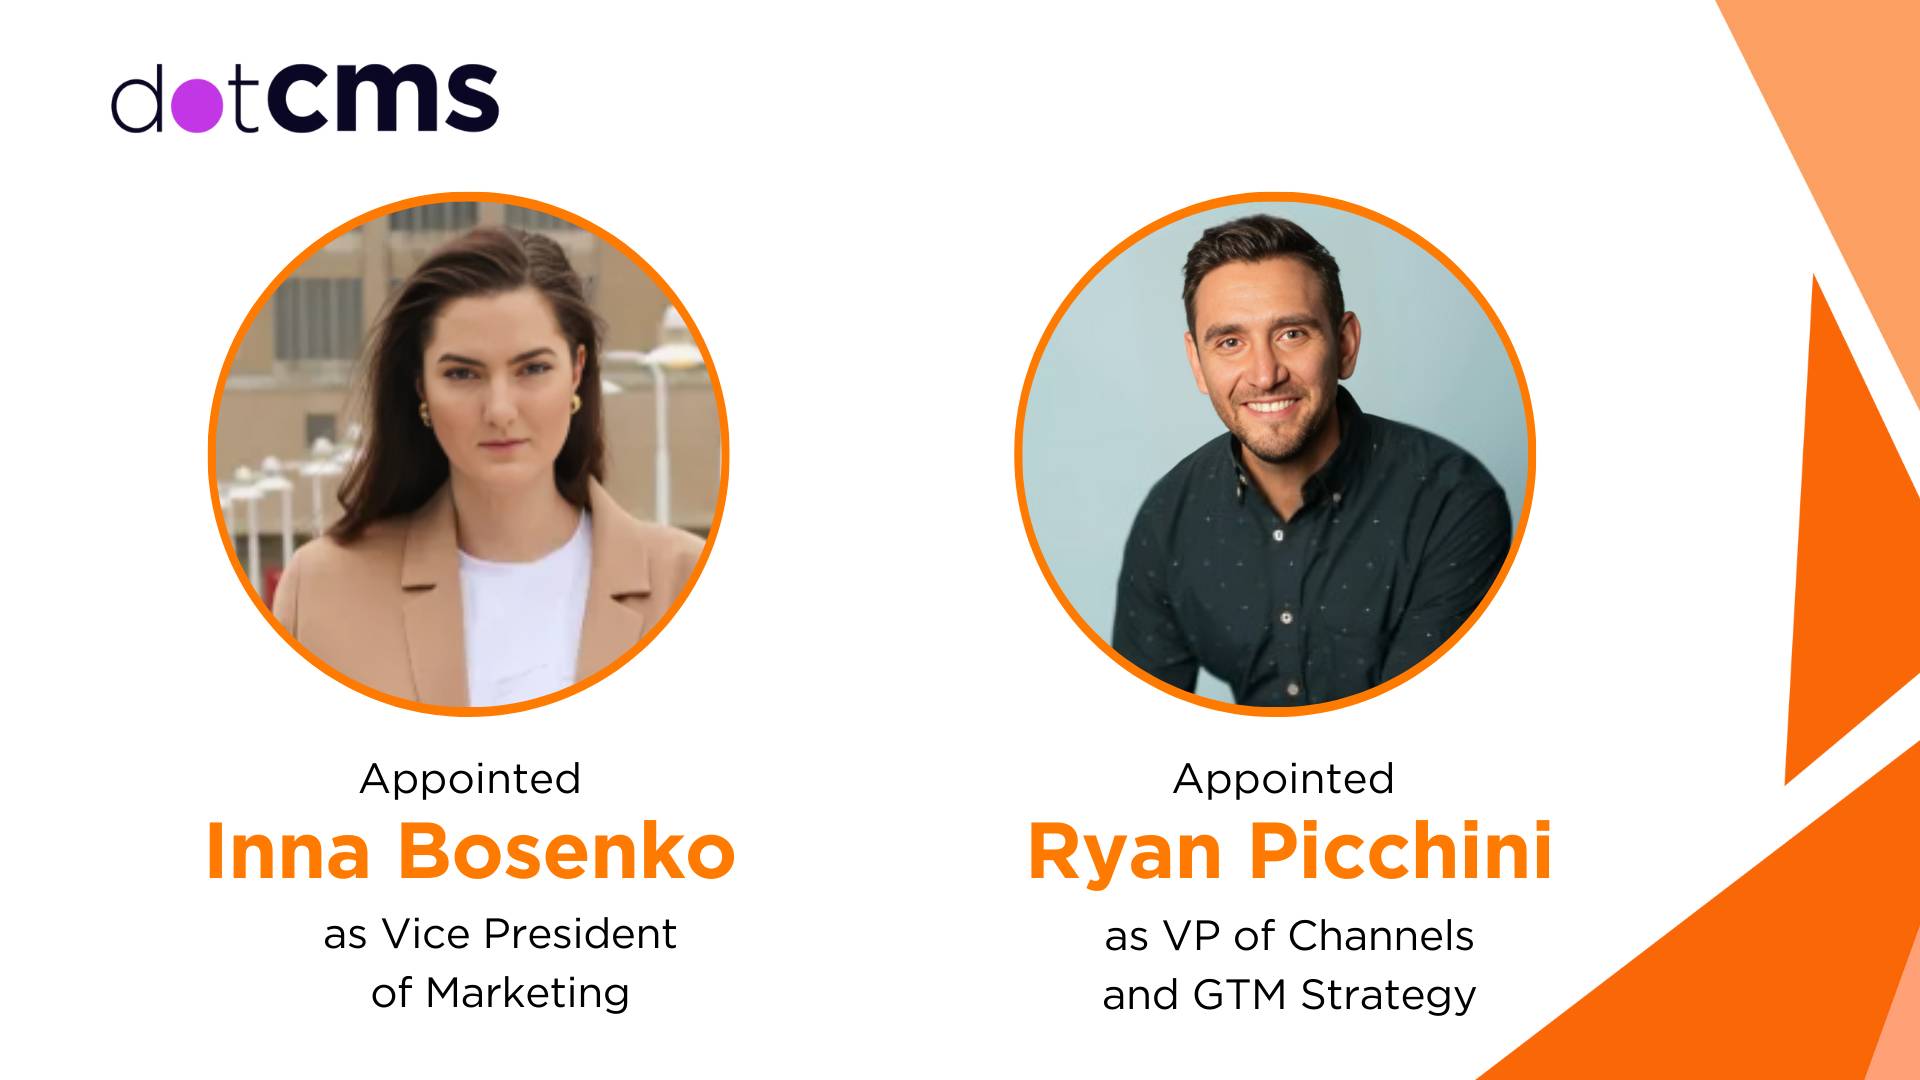 dotCMS Appoints Inna Bosenko as VP of Marketing and Ryan Picchini as VP of Channels and GTM Strategy